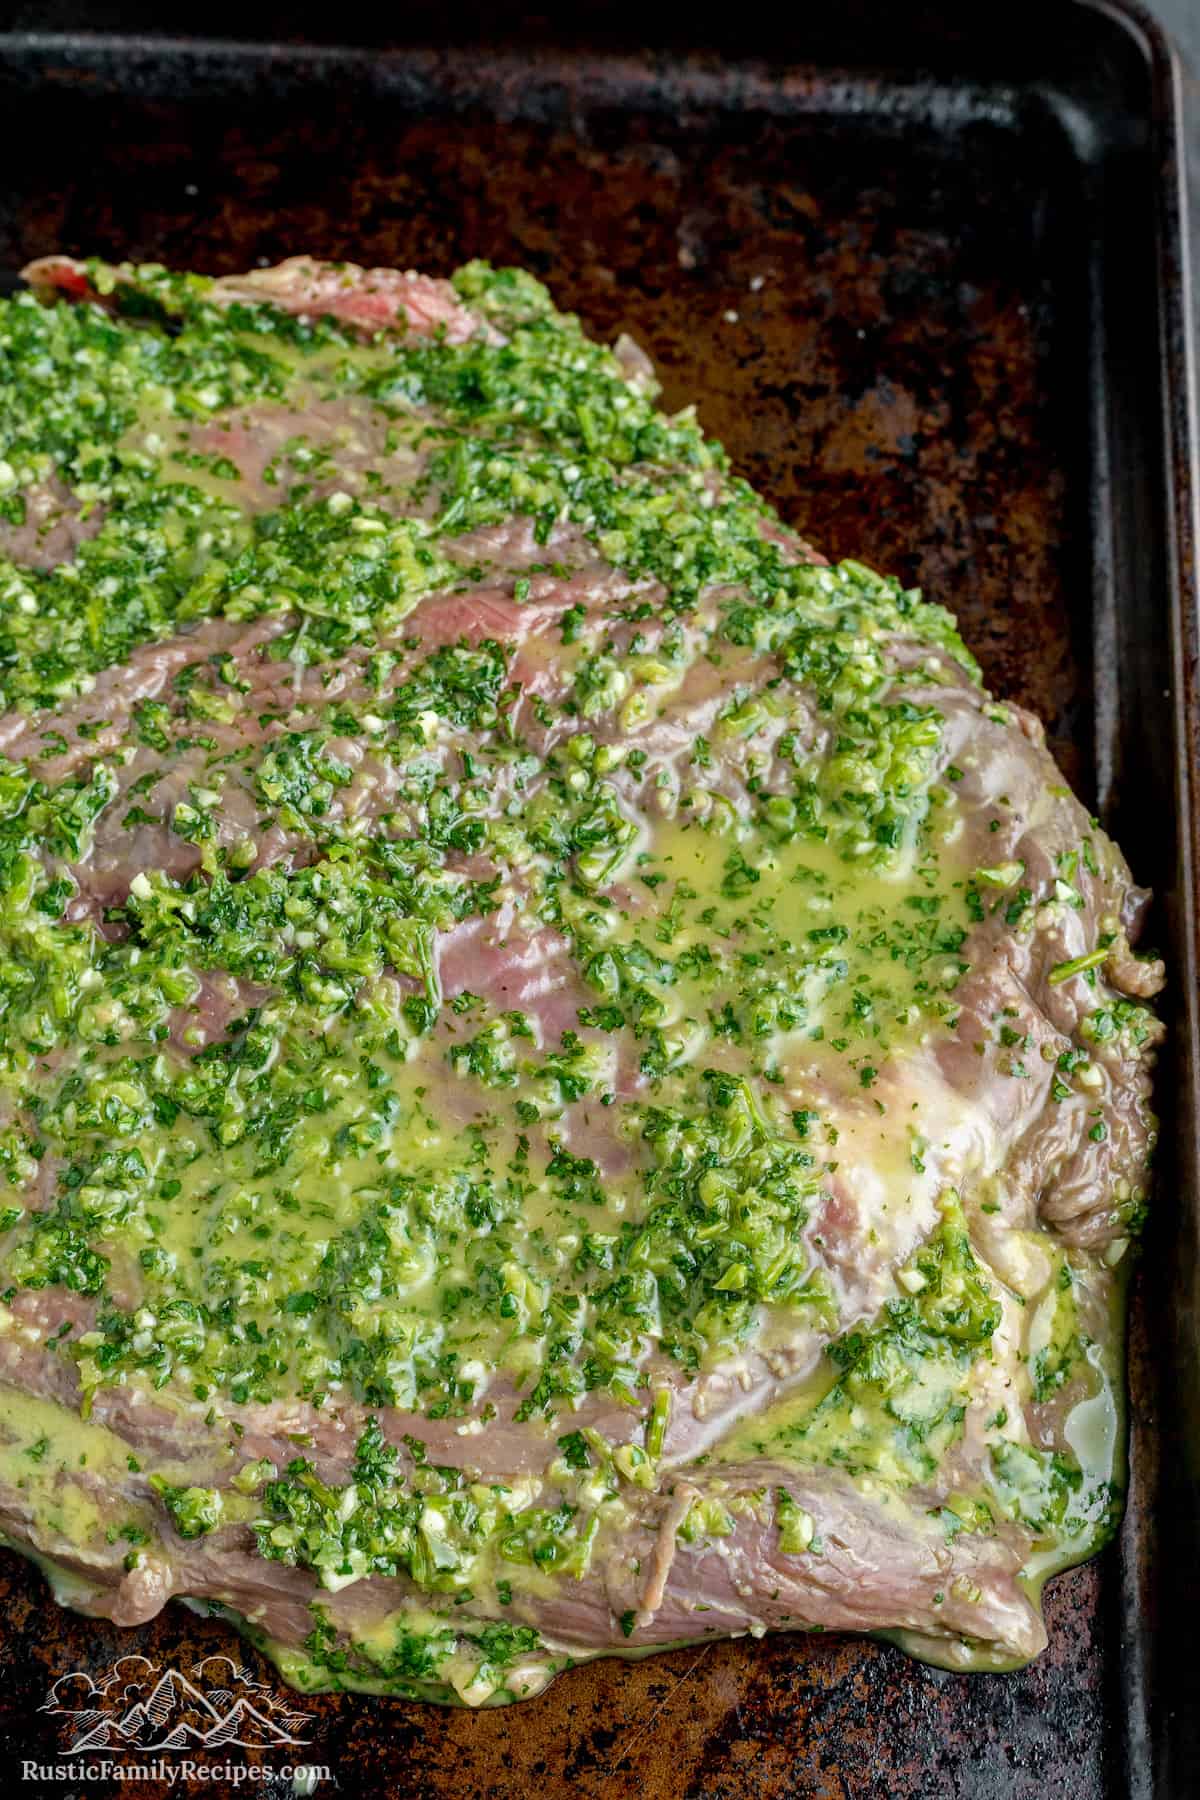 Carne asada steak with marinade ready to be cooked